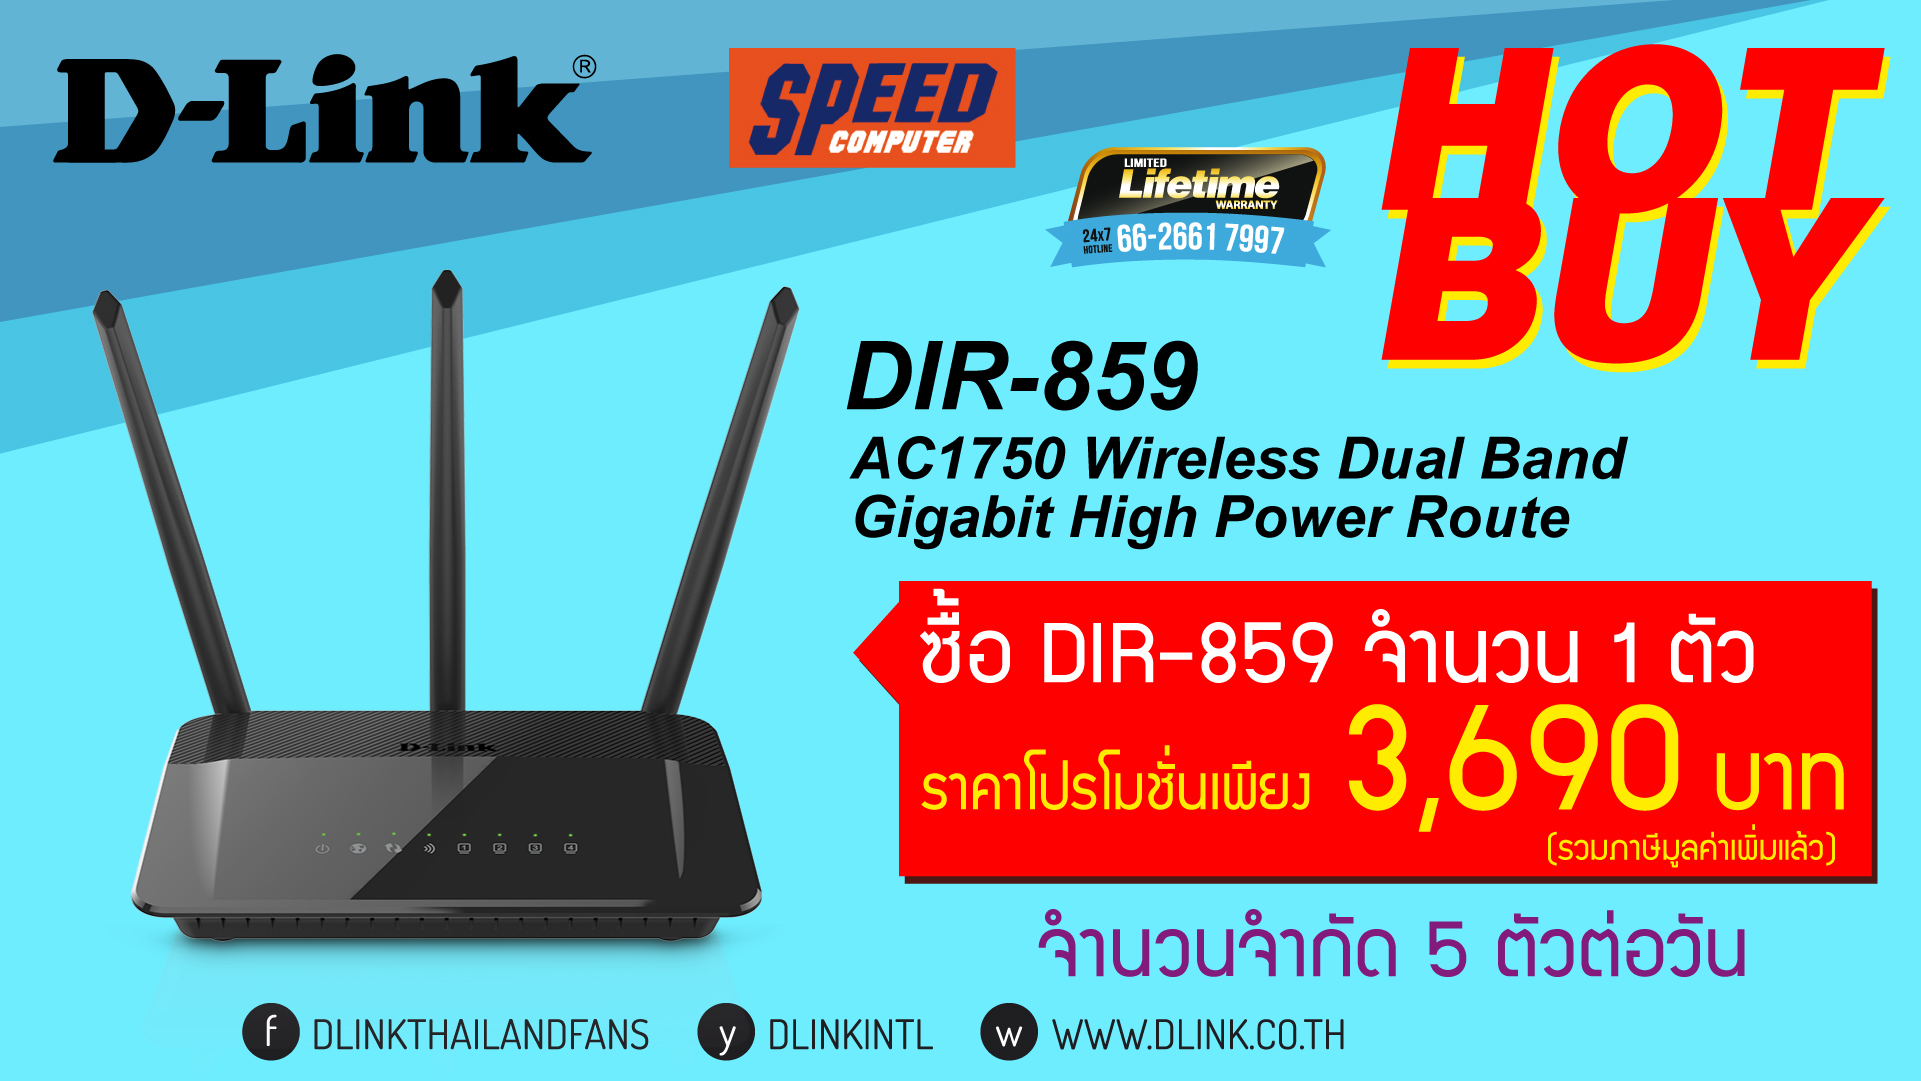 D-Link-Commart-Screen-for-Speed-March-16-12